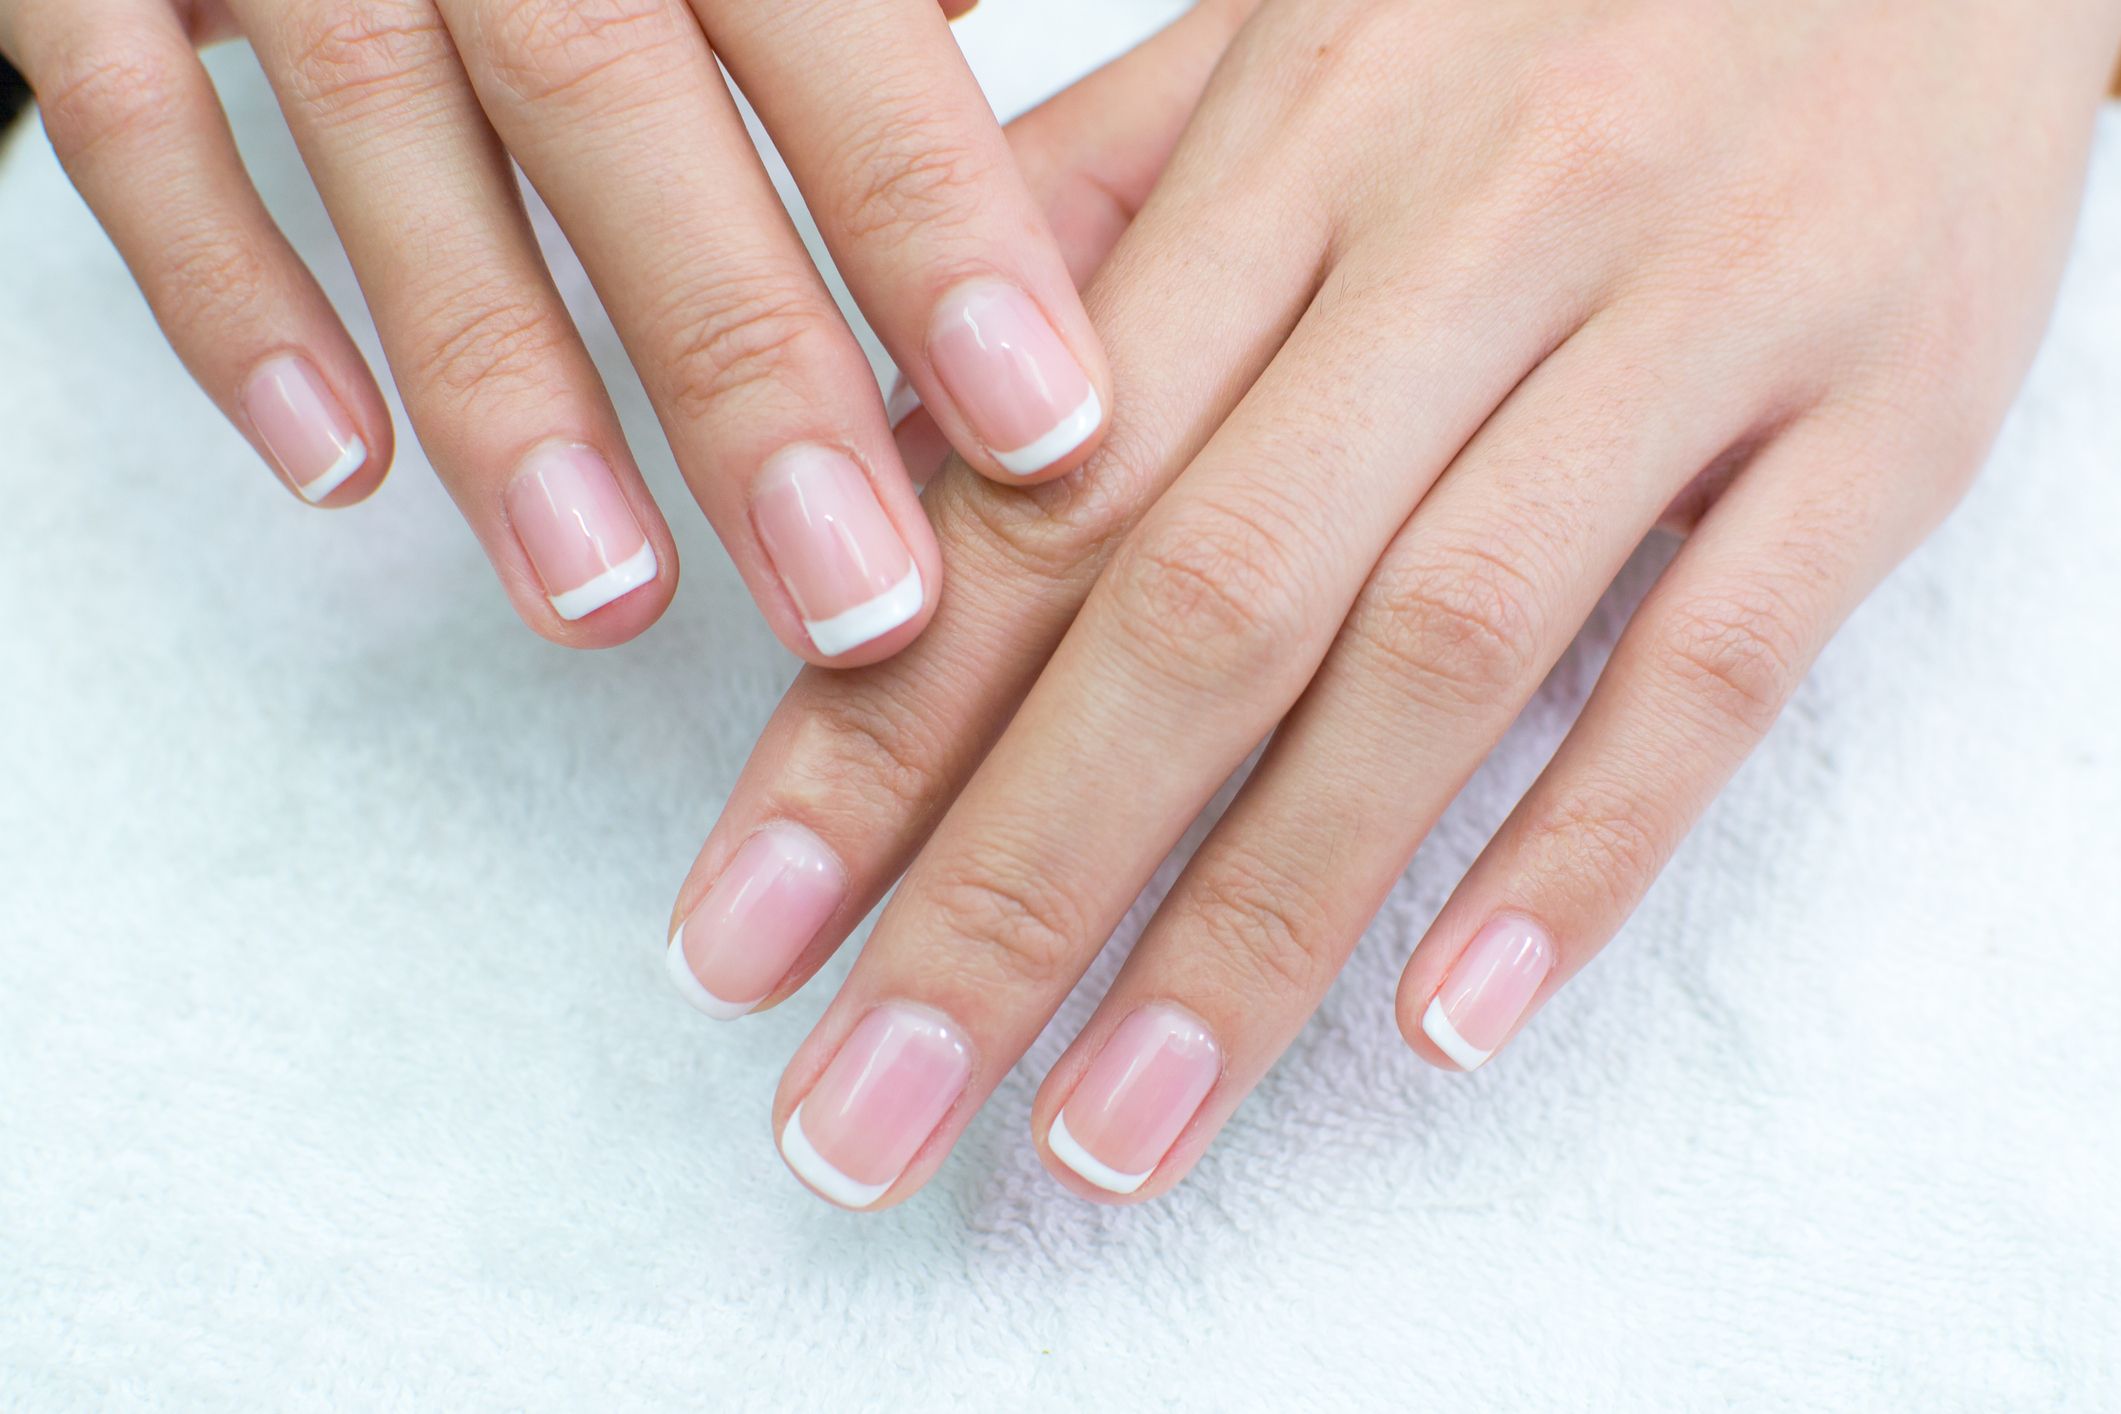 4 Possible Causes of Nail Issues | Woman's World